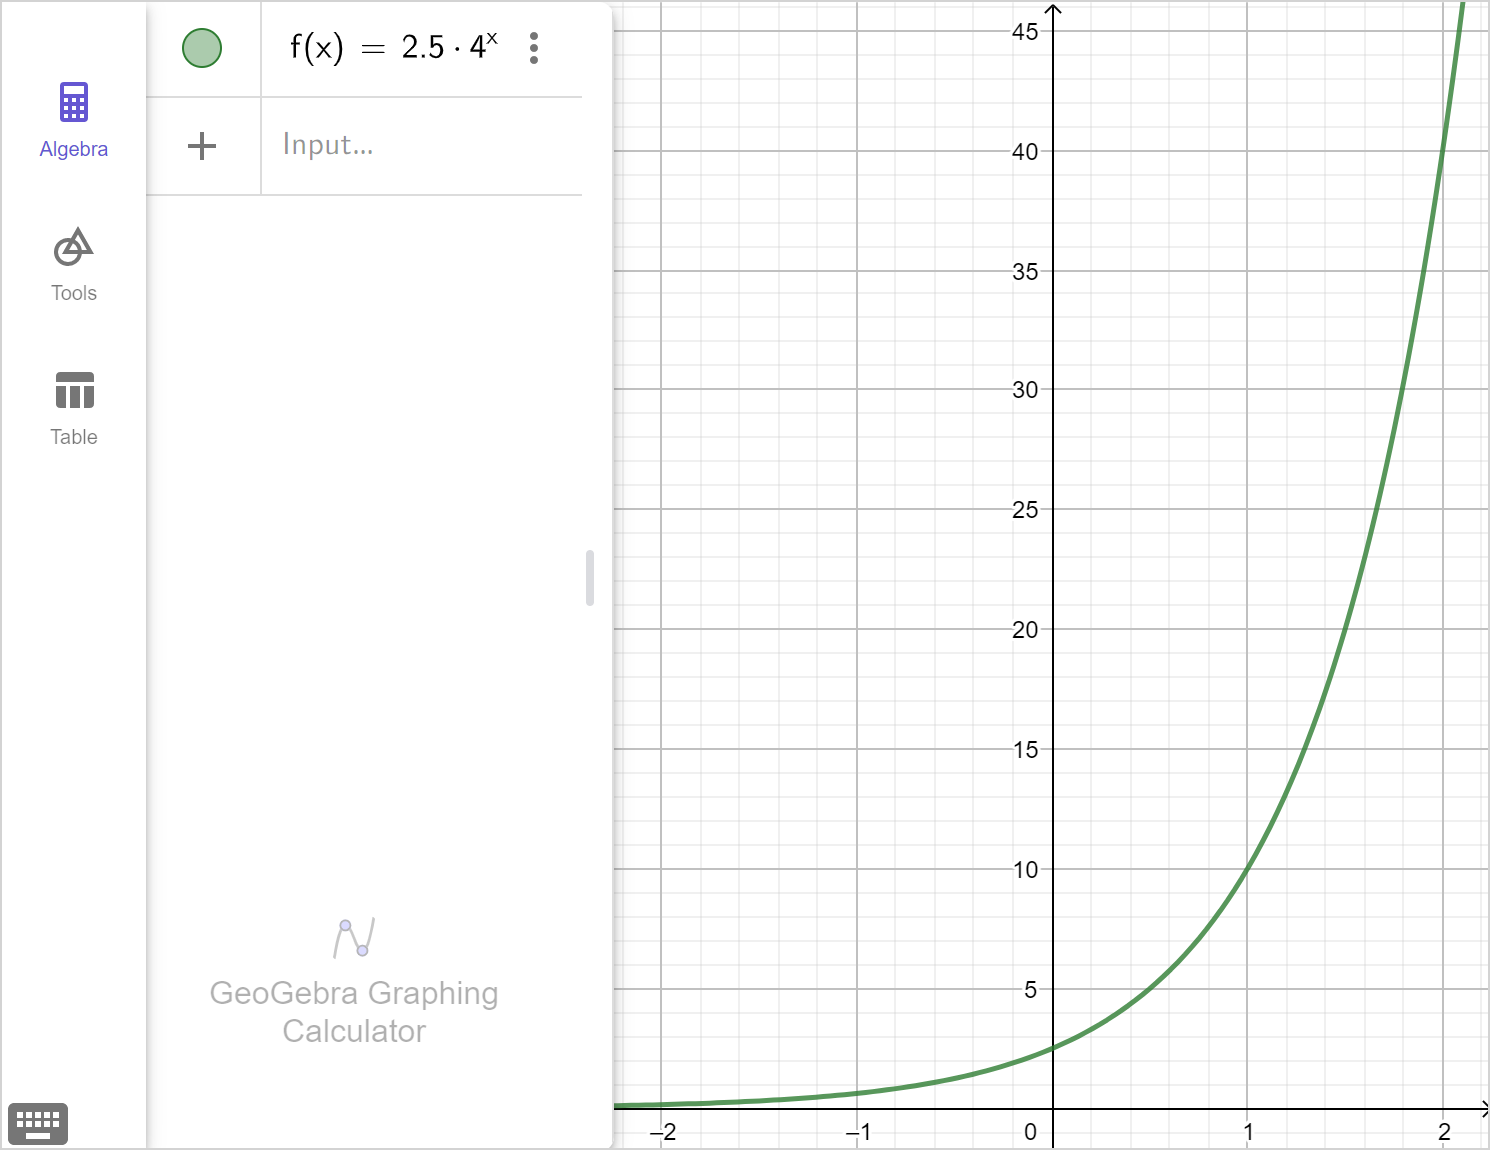 A screenshot of the GeoGebra graphing calculator showing the graph of f of x equals 2.5 times 4 raised to x. Speak to your teacher for more details.